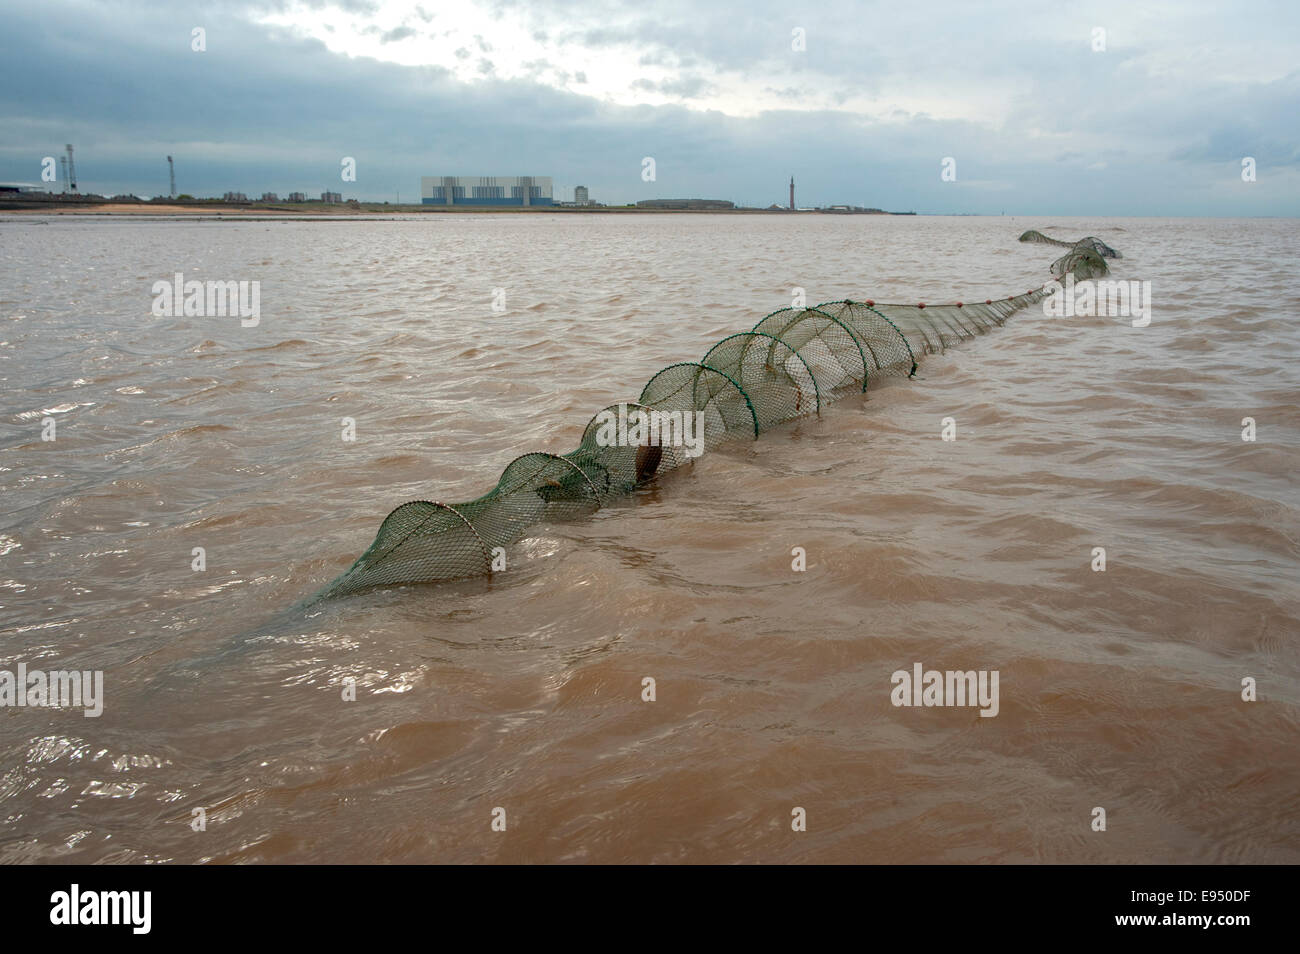 The dying art of fyke net fishing for dover soles in the river humber. Stock Photo